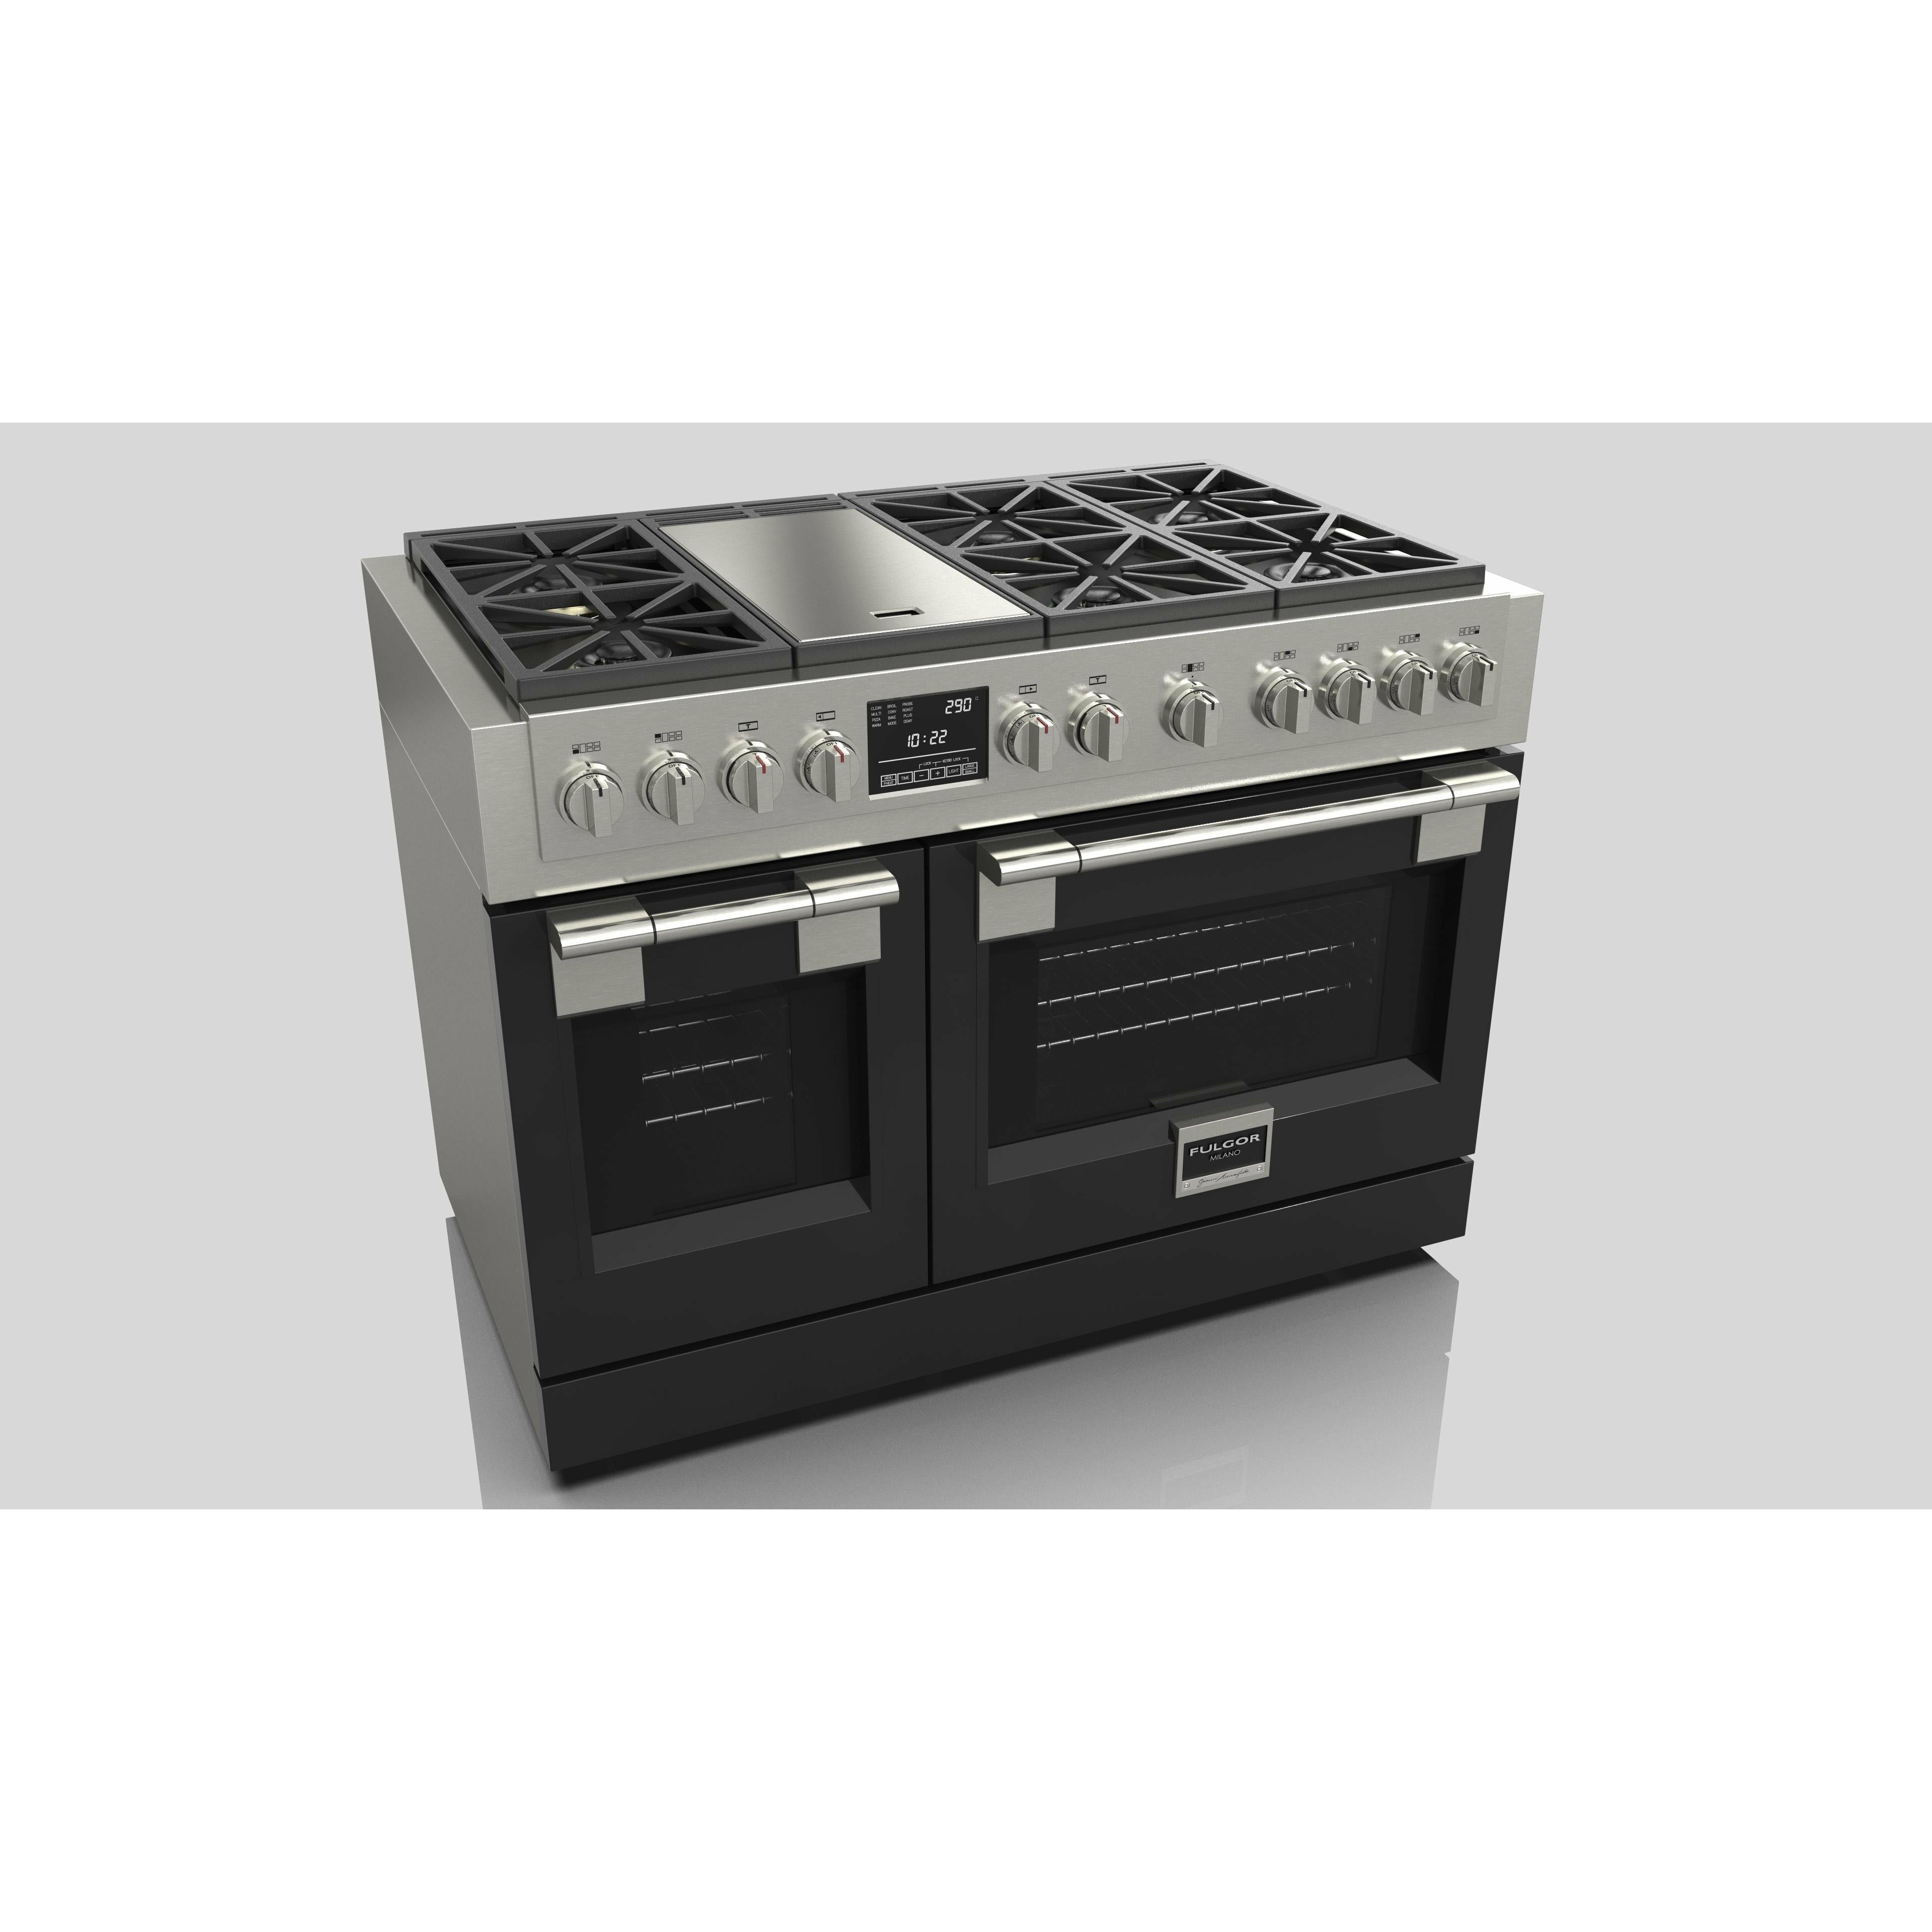 Fulgor Milano 48" Dual Fuel Professional Range with 6 Dual Flame Burners,  6.5 Cu. Ft. Total Capacity Stainless Steel - F6PDF486GS1